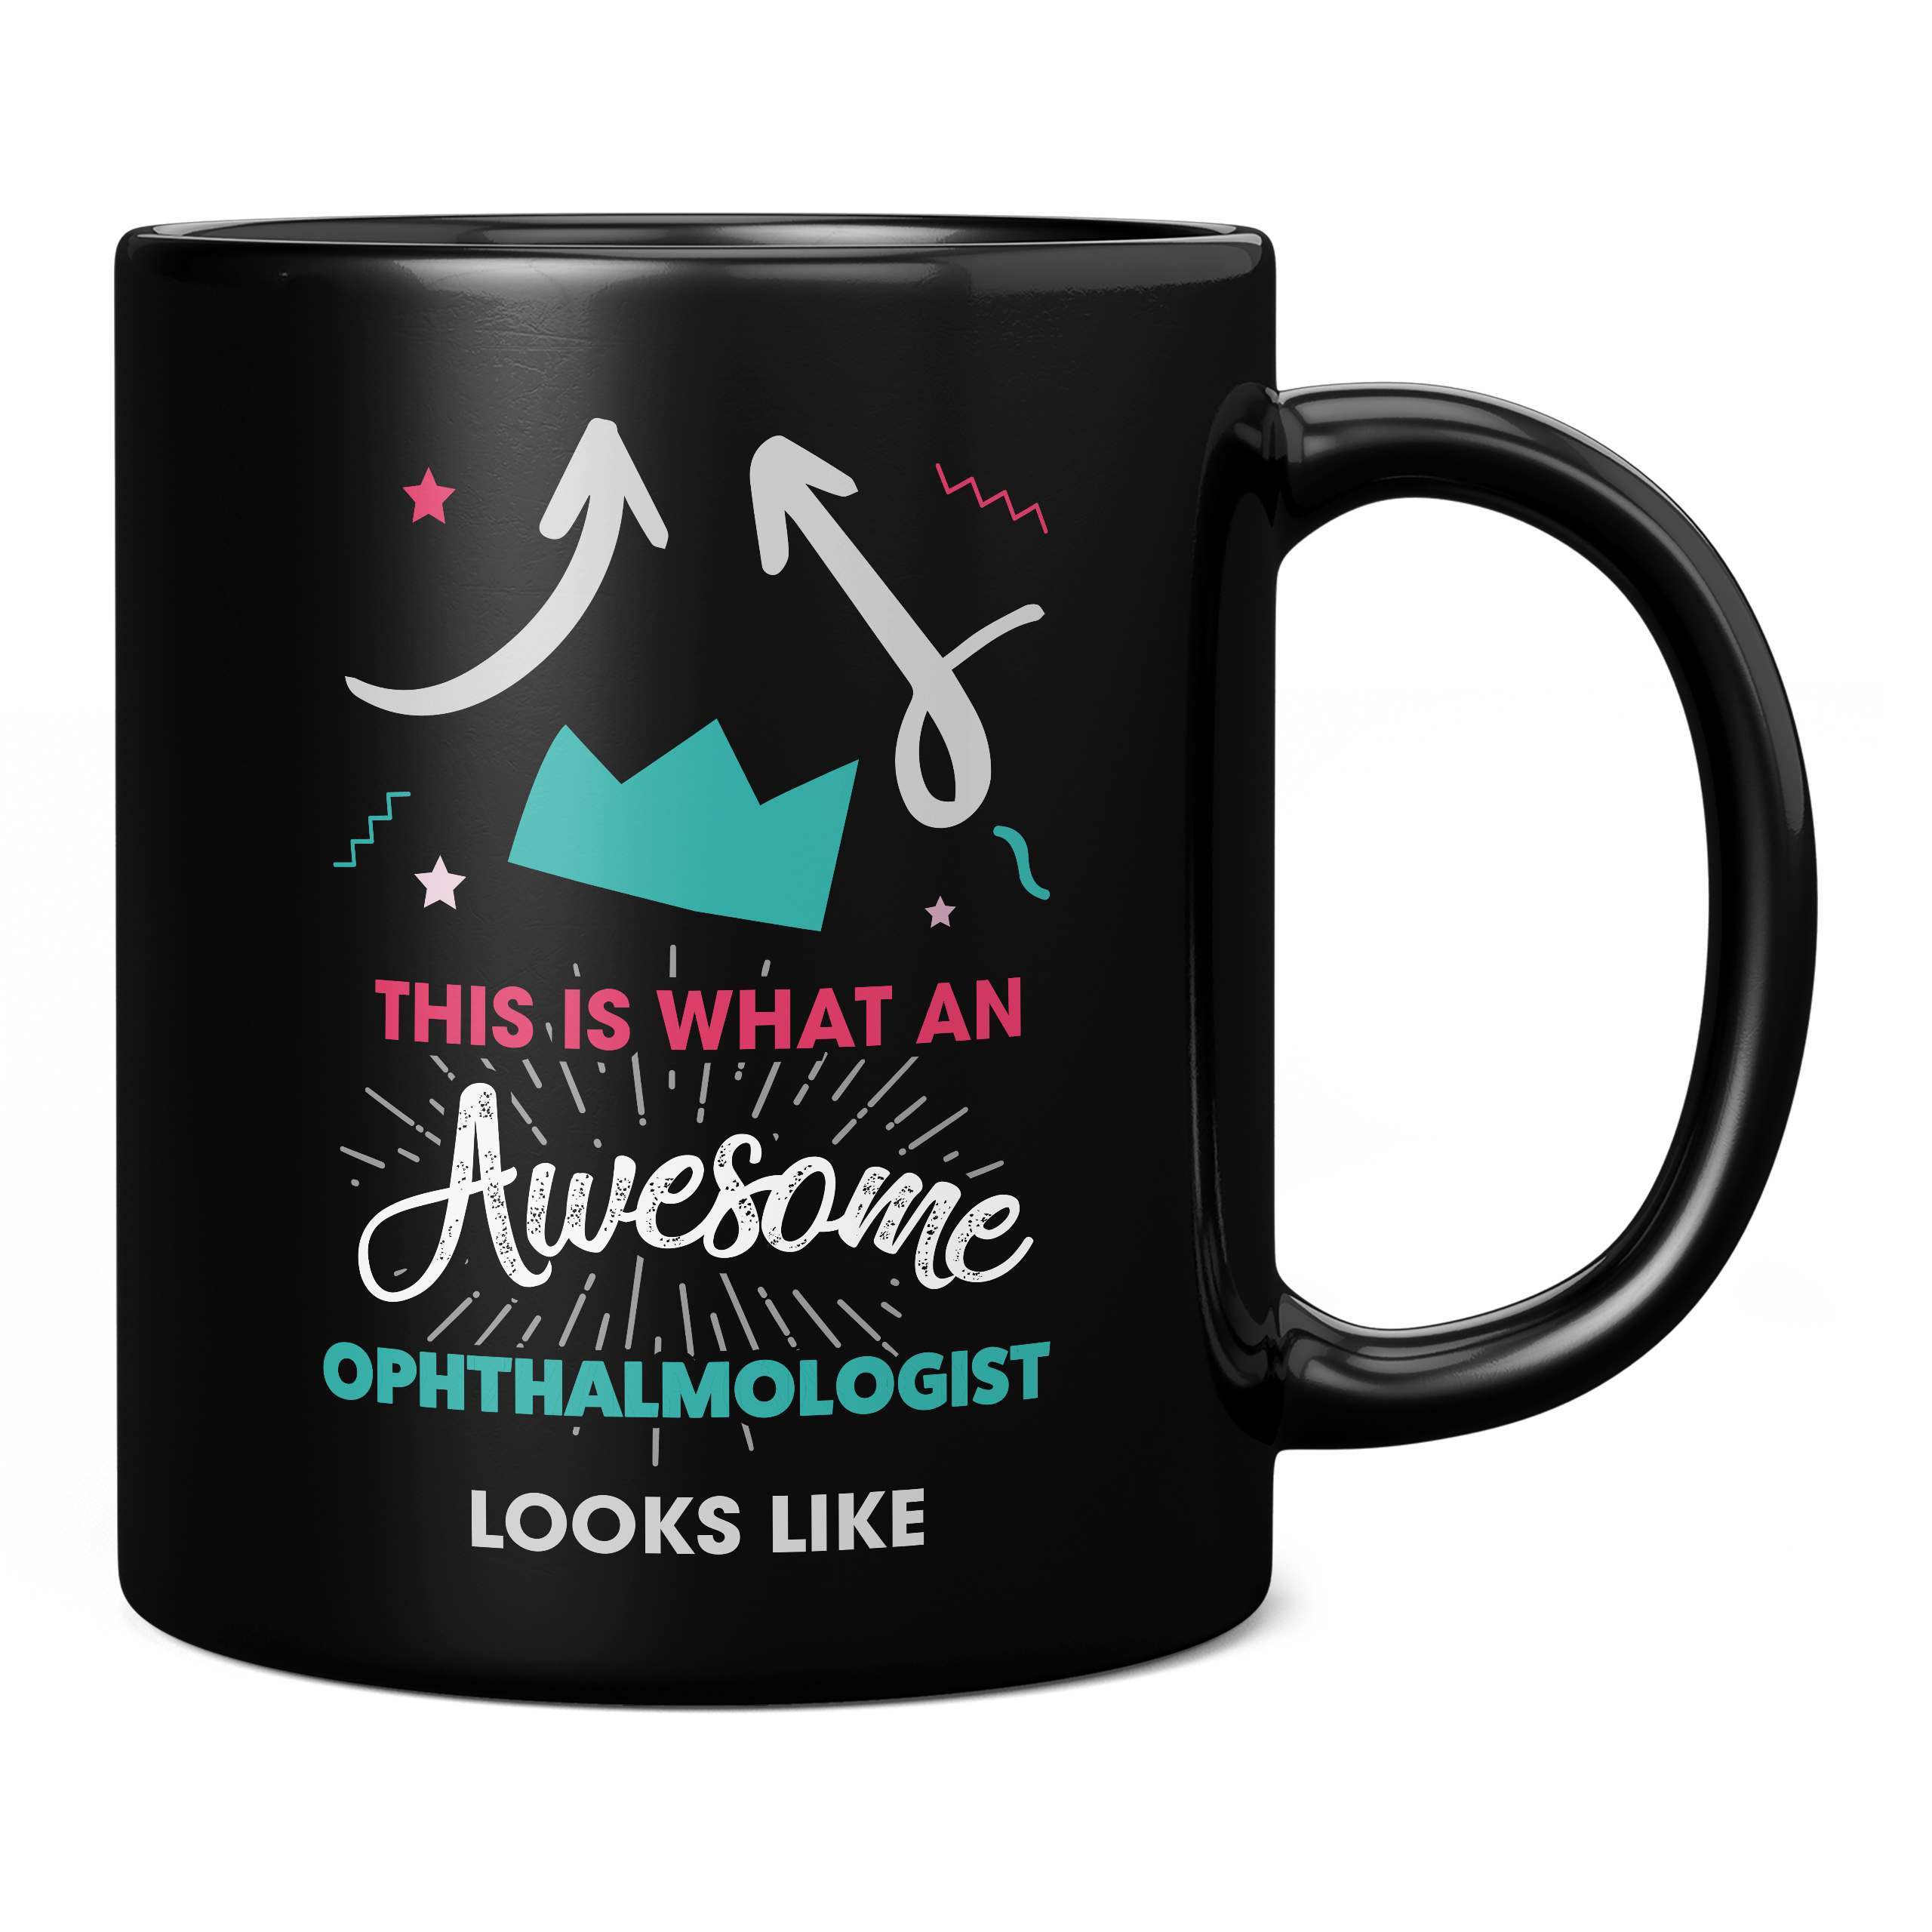 THIS IS WHAT AN AWESOME OPHTHALMOLOGIST LOOKS LIKE 11OZ NOVELTY MUG